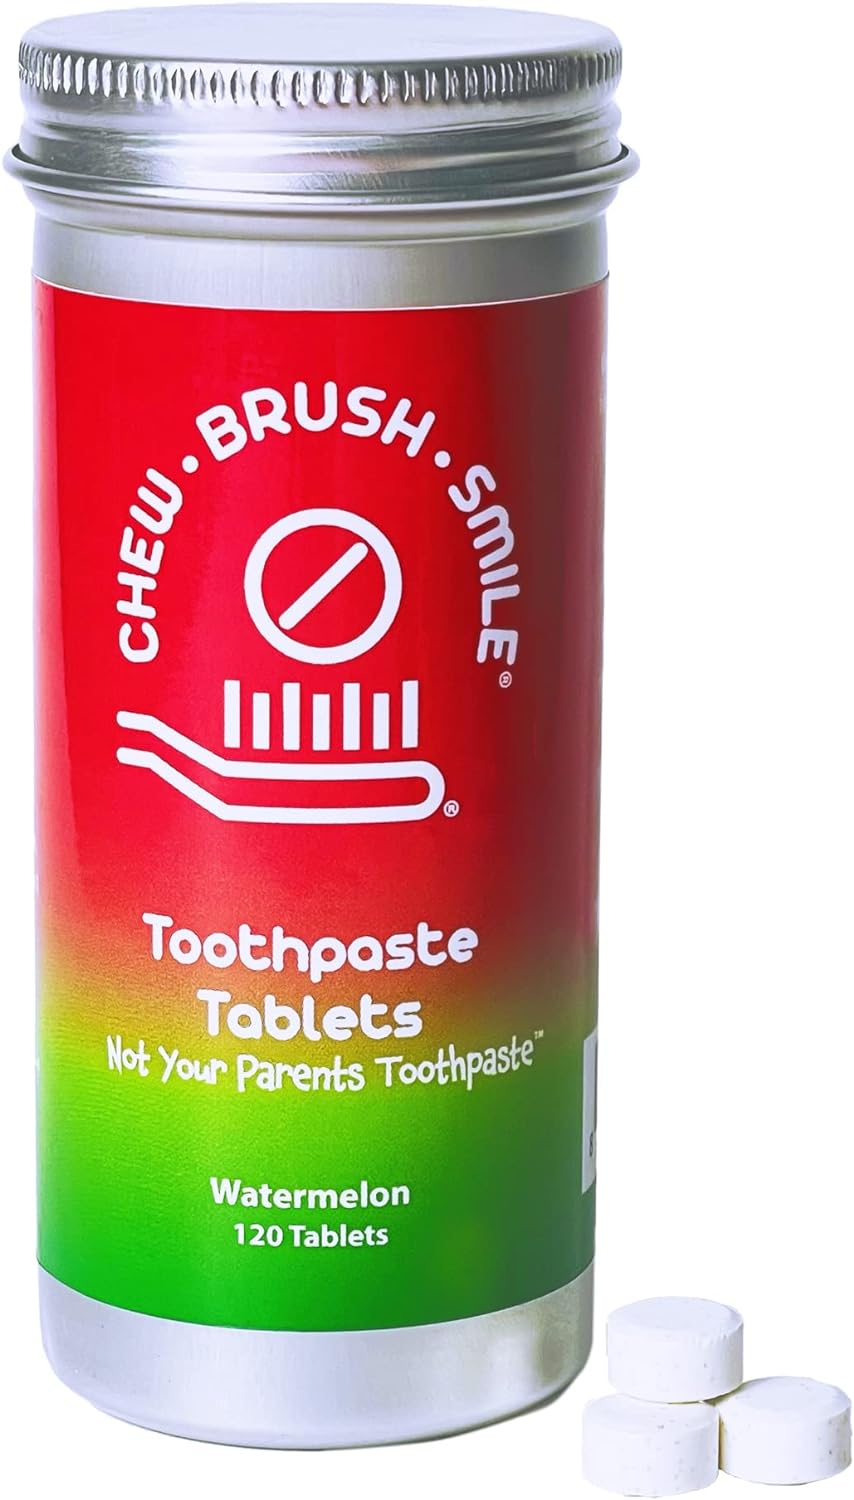 Chew Brush Smile Toothpaste Tablets Watermelon 120 Count : Health & Household